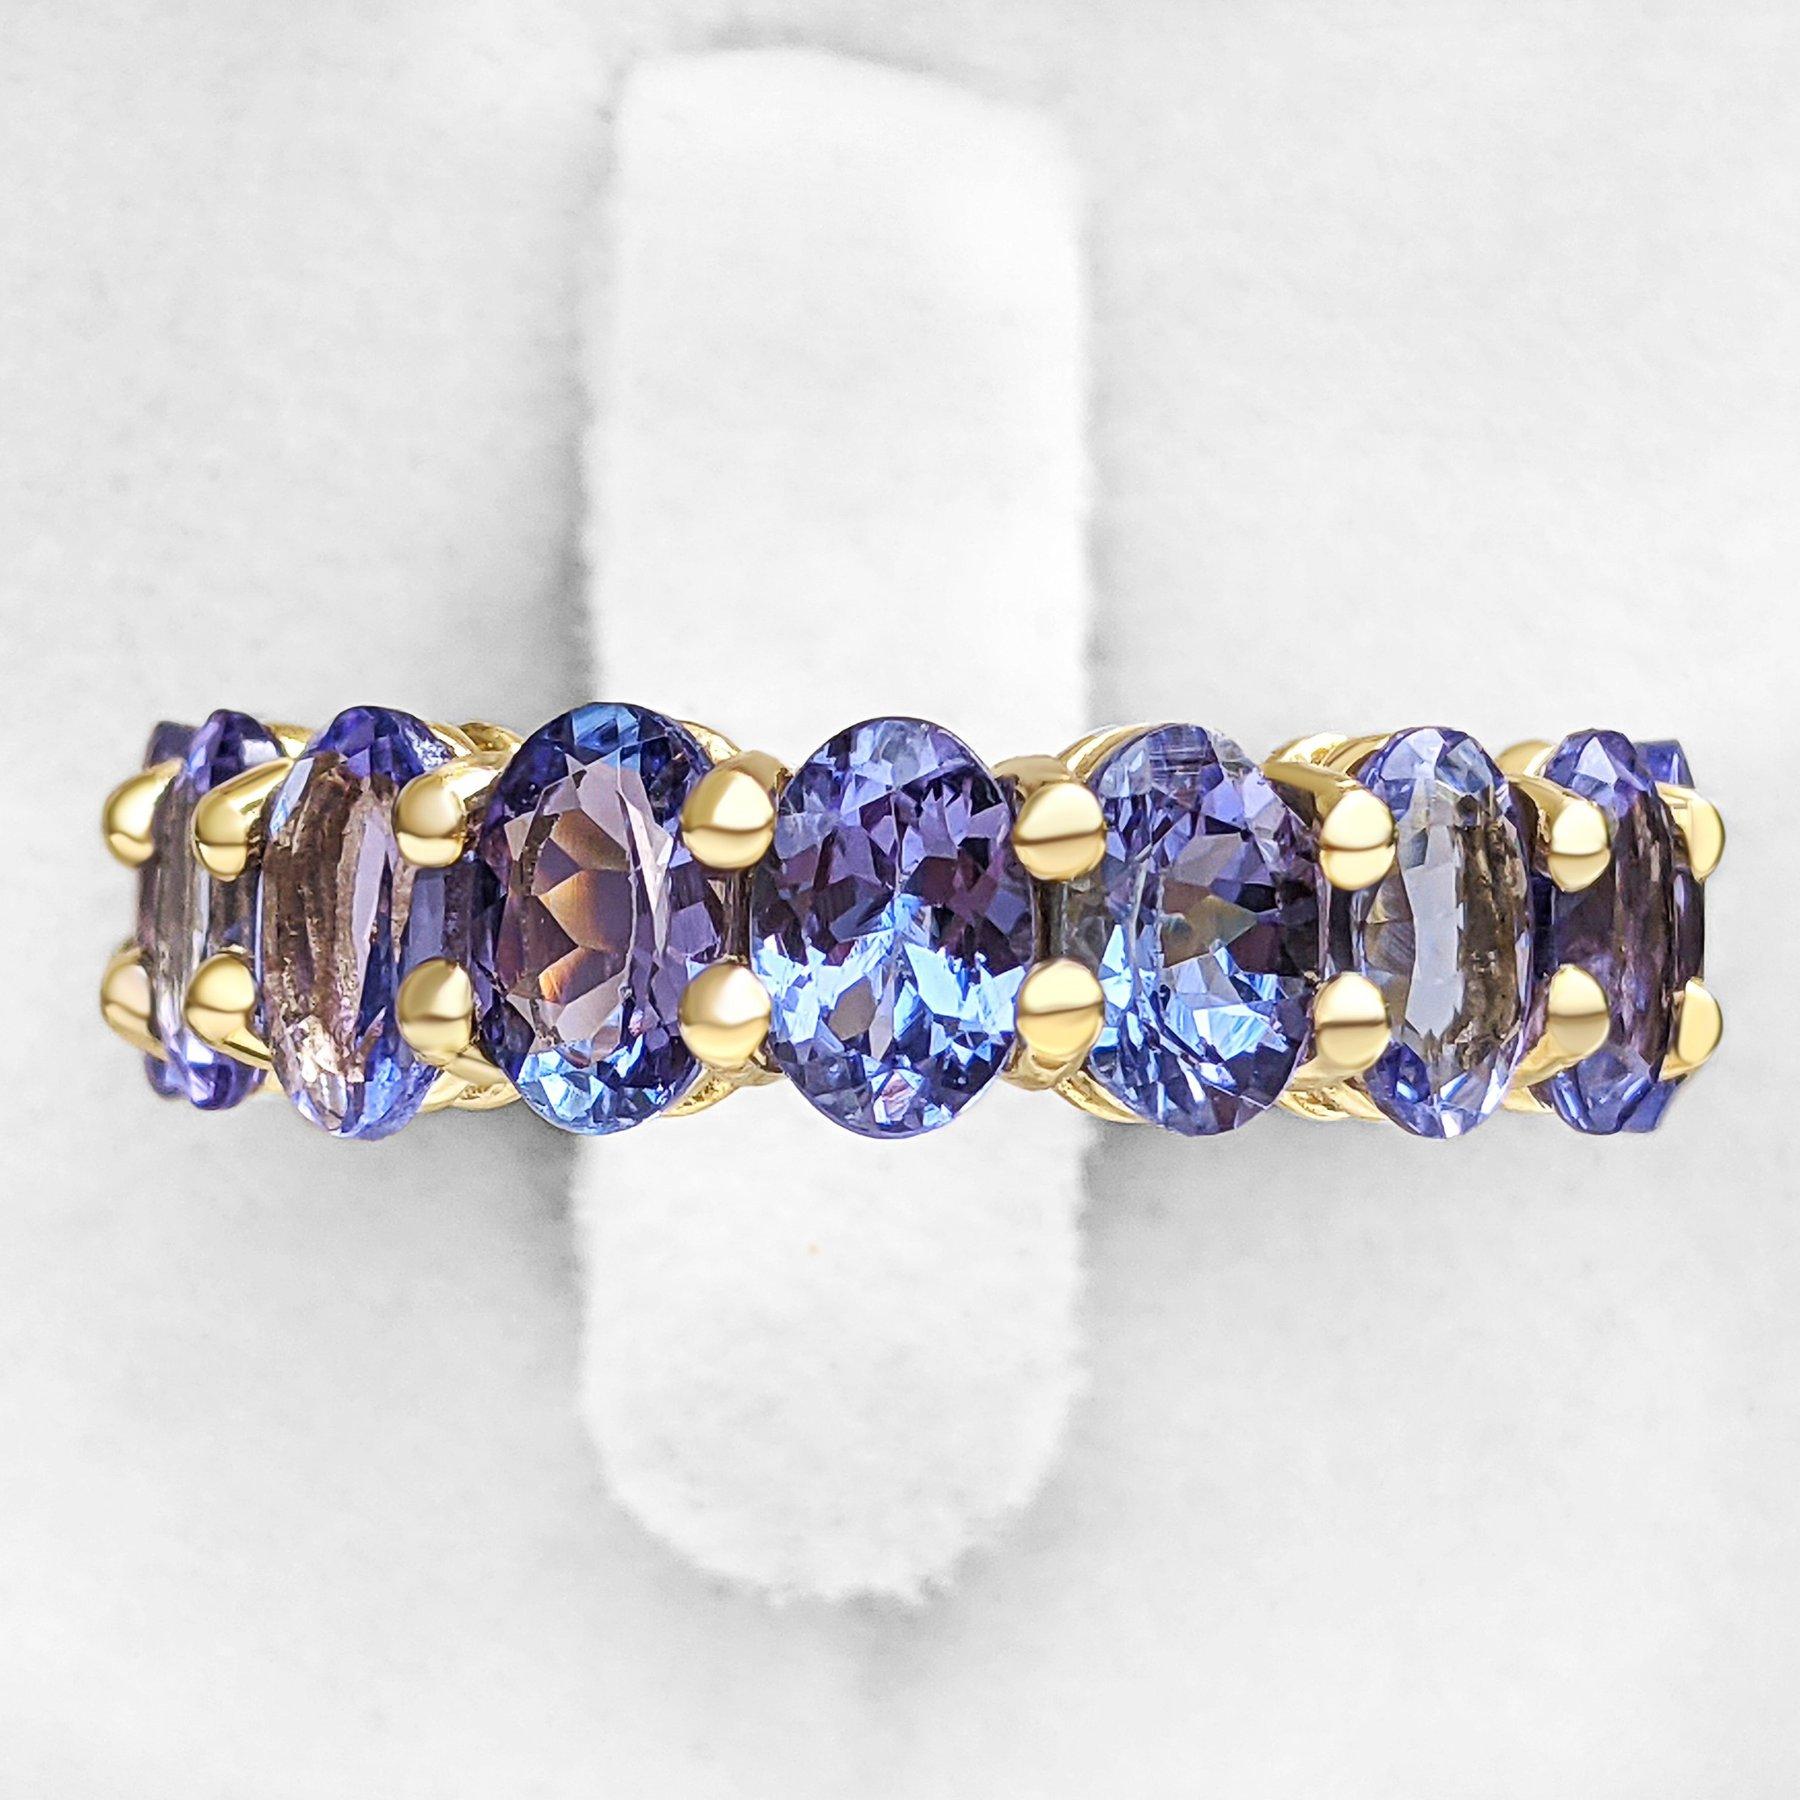 Art Deco NO RESERVE! 8.18 Carat Tanzanite Eternity Band - 14 kt. Yellow Gold - Ring For Sale